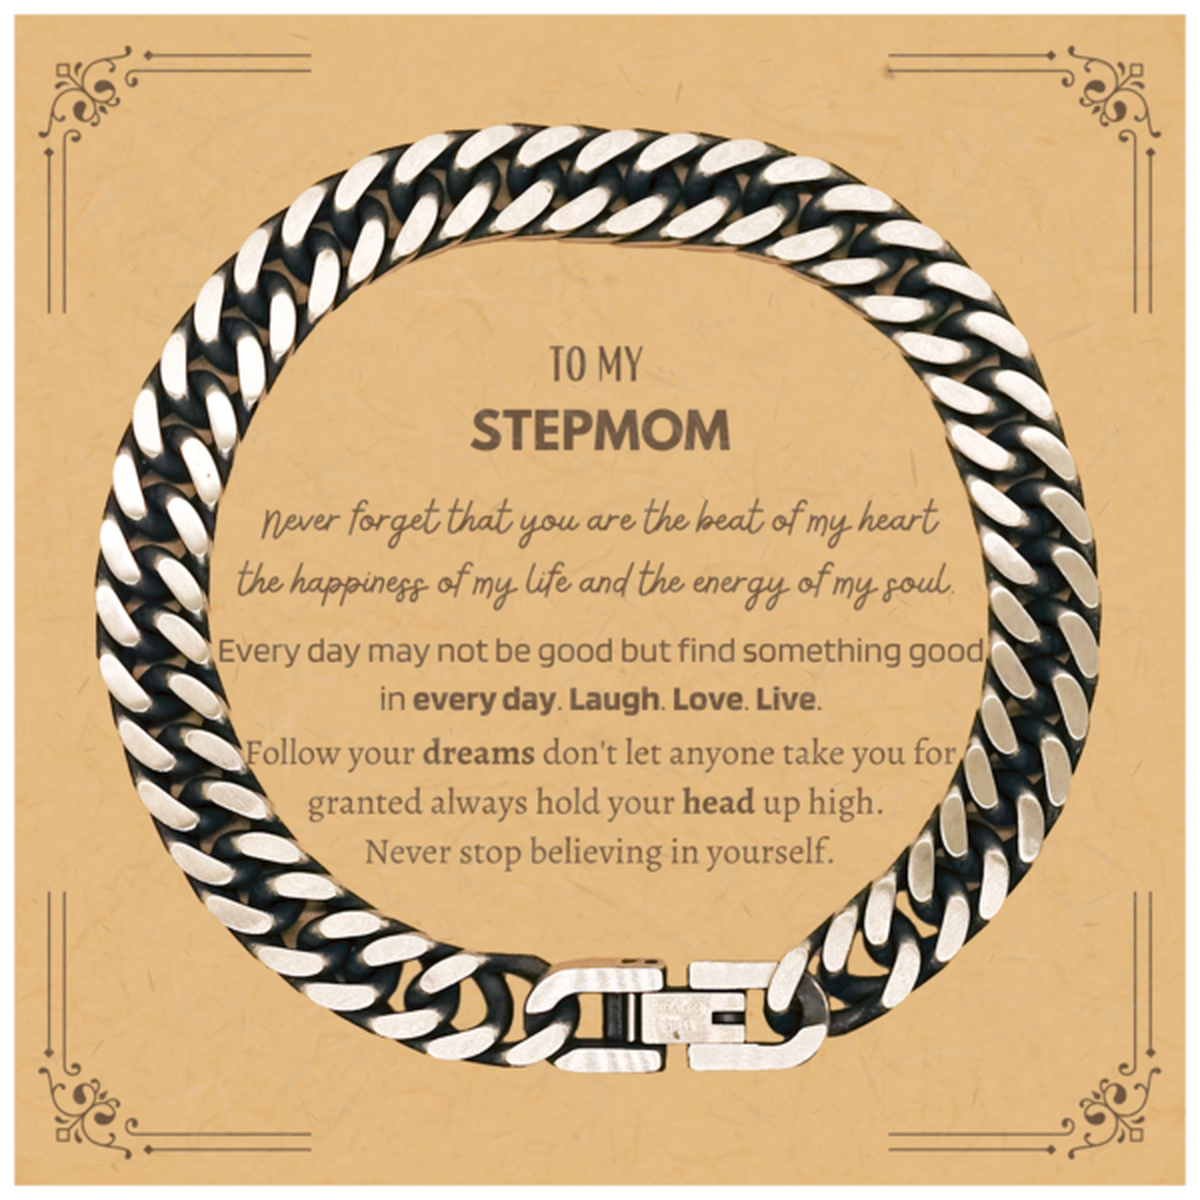 To My Stepmom Message Card Gifts, Christmas Stepmom Cuban Link Chain Bracelet Present, Birthday Unique Motivational For Stepmom, To My Stepmom Never forget that you are the beat of my heart the happiness of my life and the energy of my soul